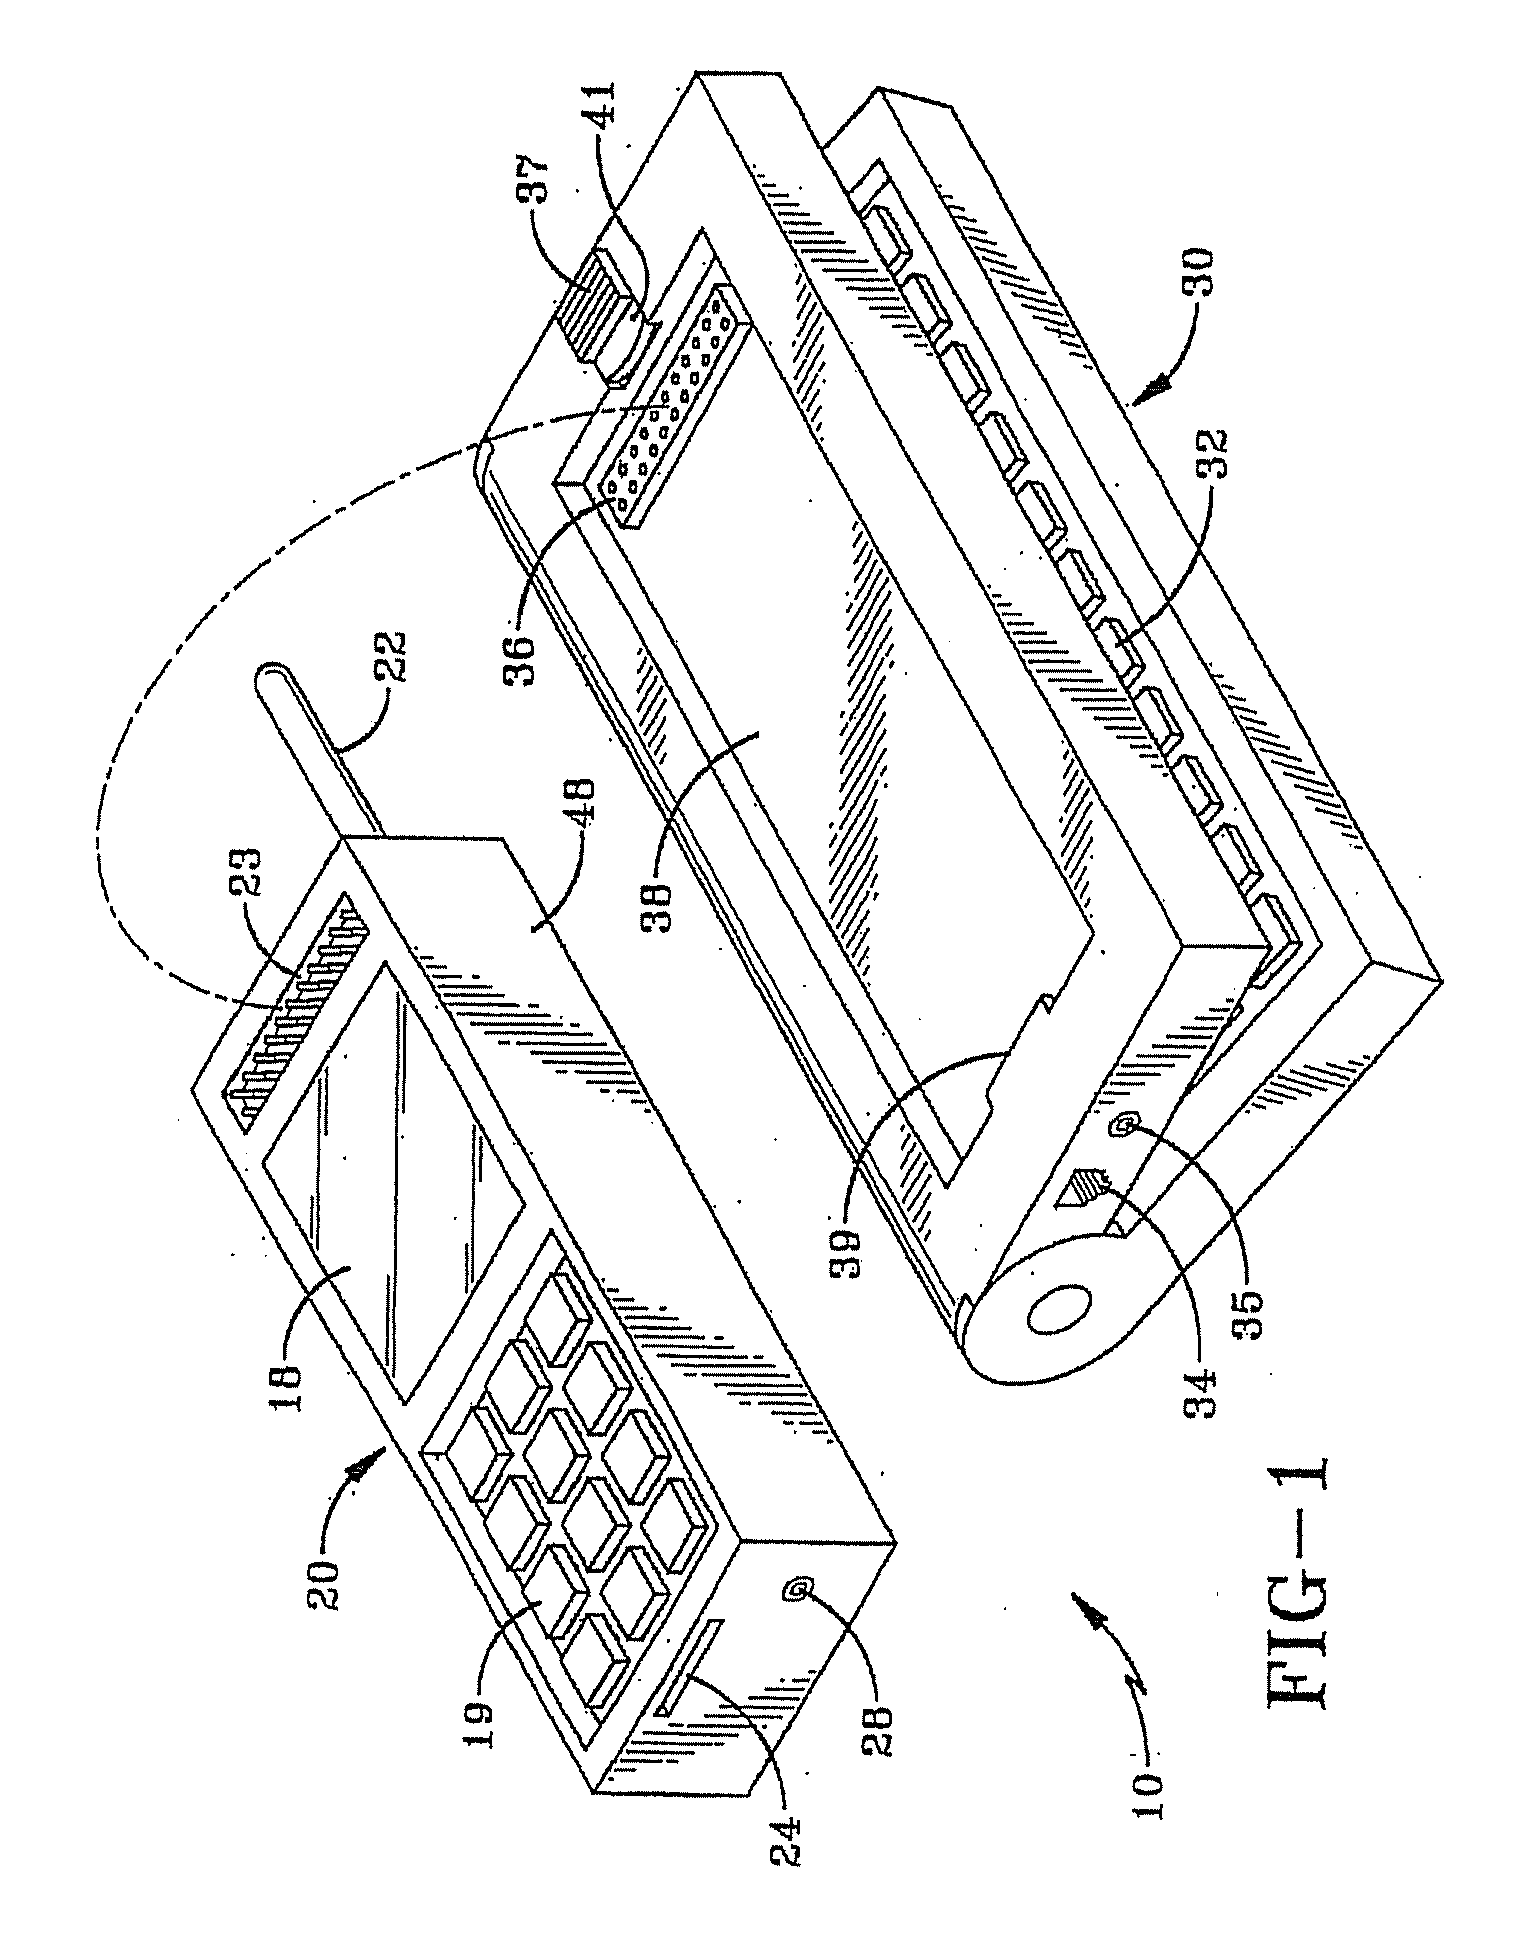 Portable computing, communication and entertainment device with central processor carried in a detachable portable device